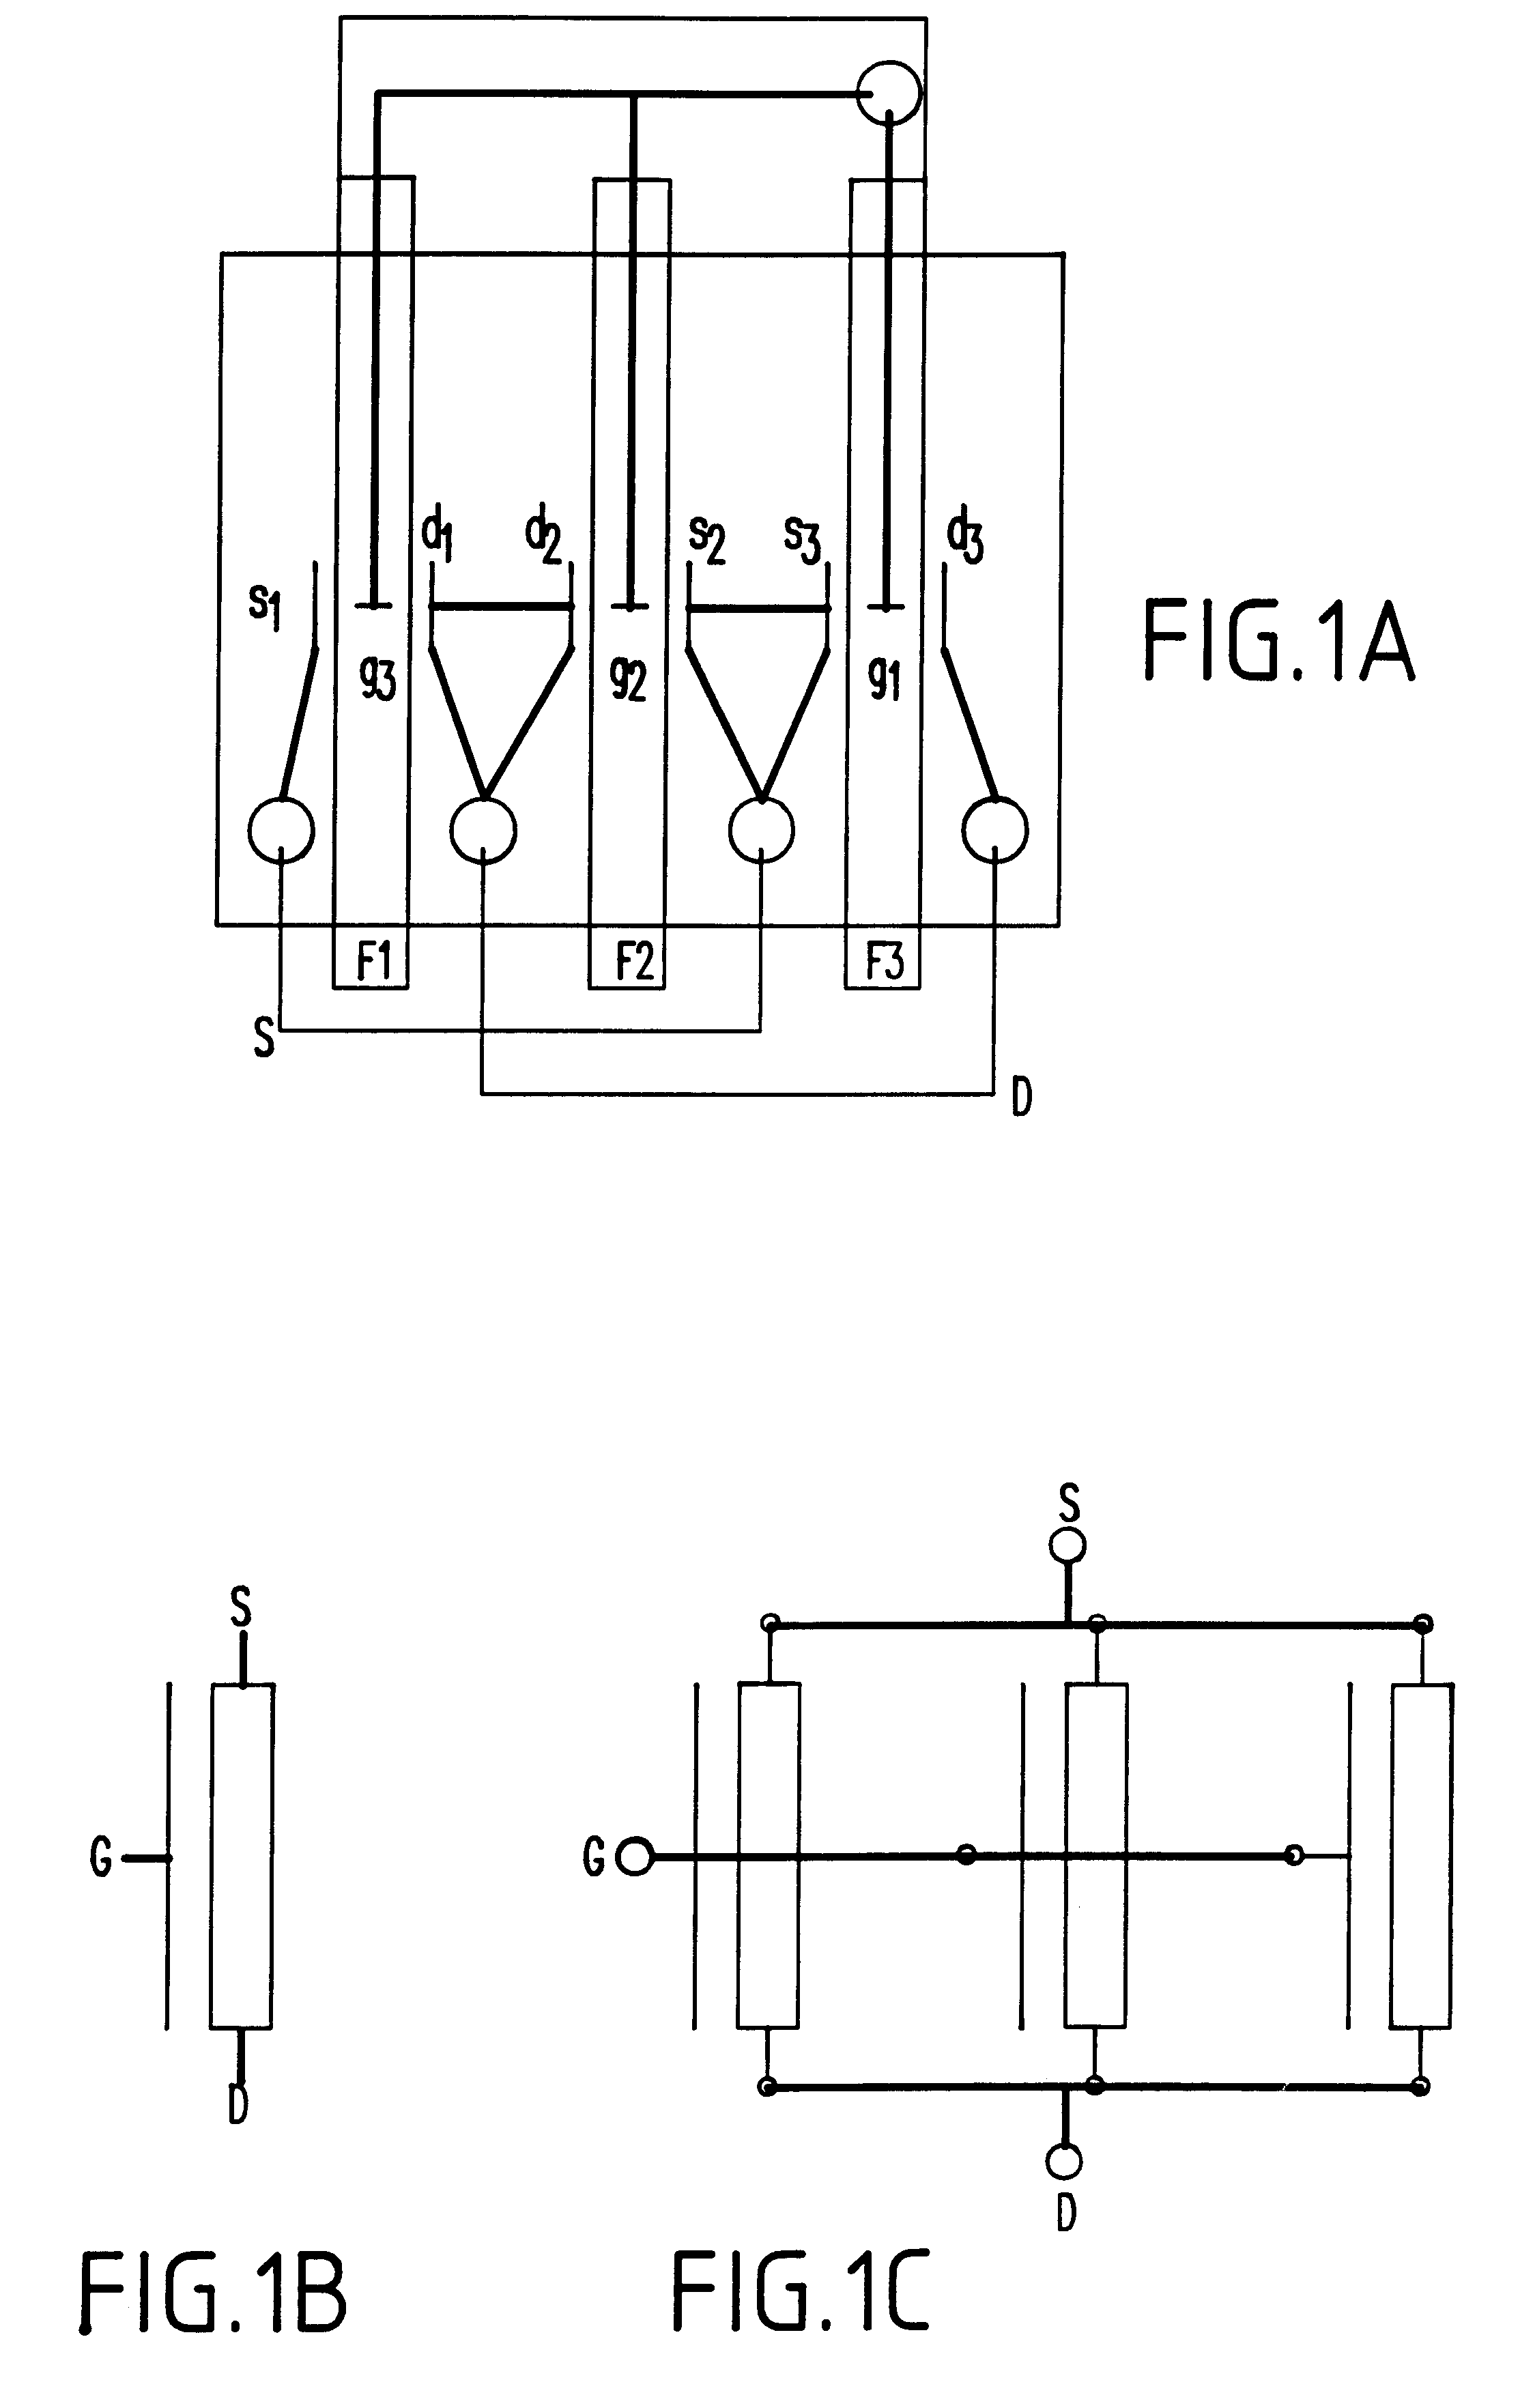 Method of performing parasitic extraction for a multi-fingered transistor